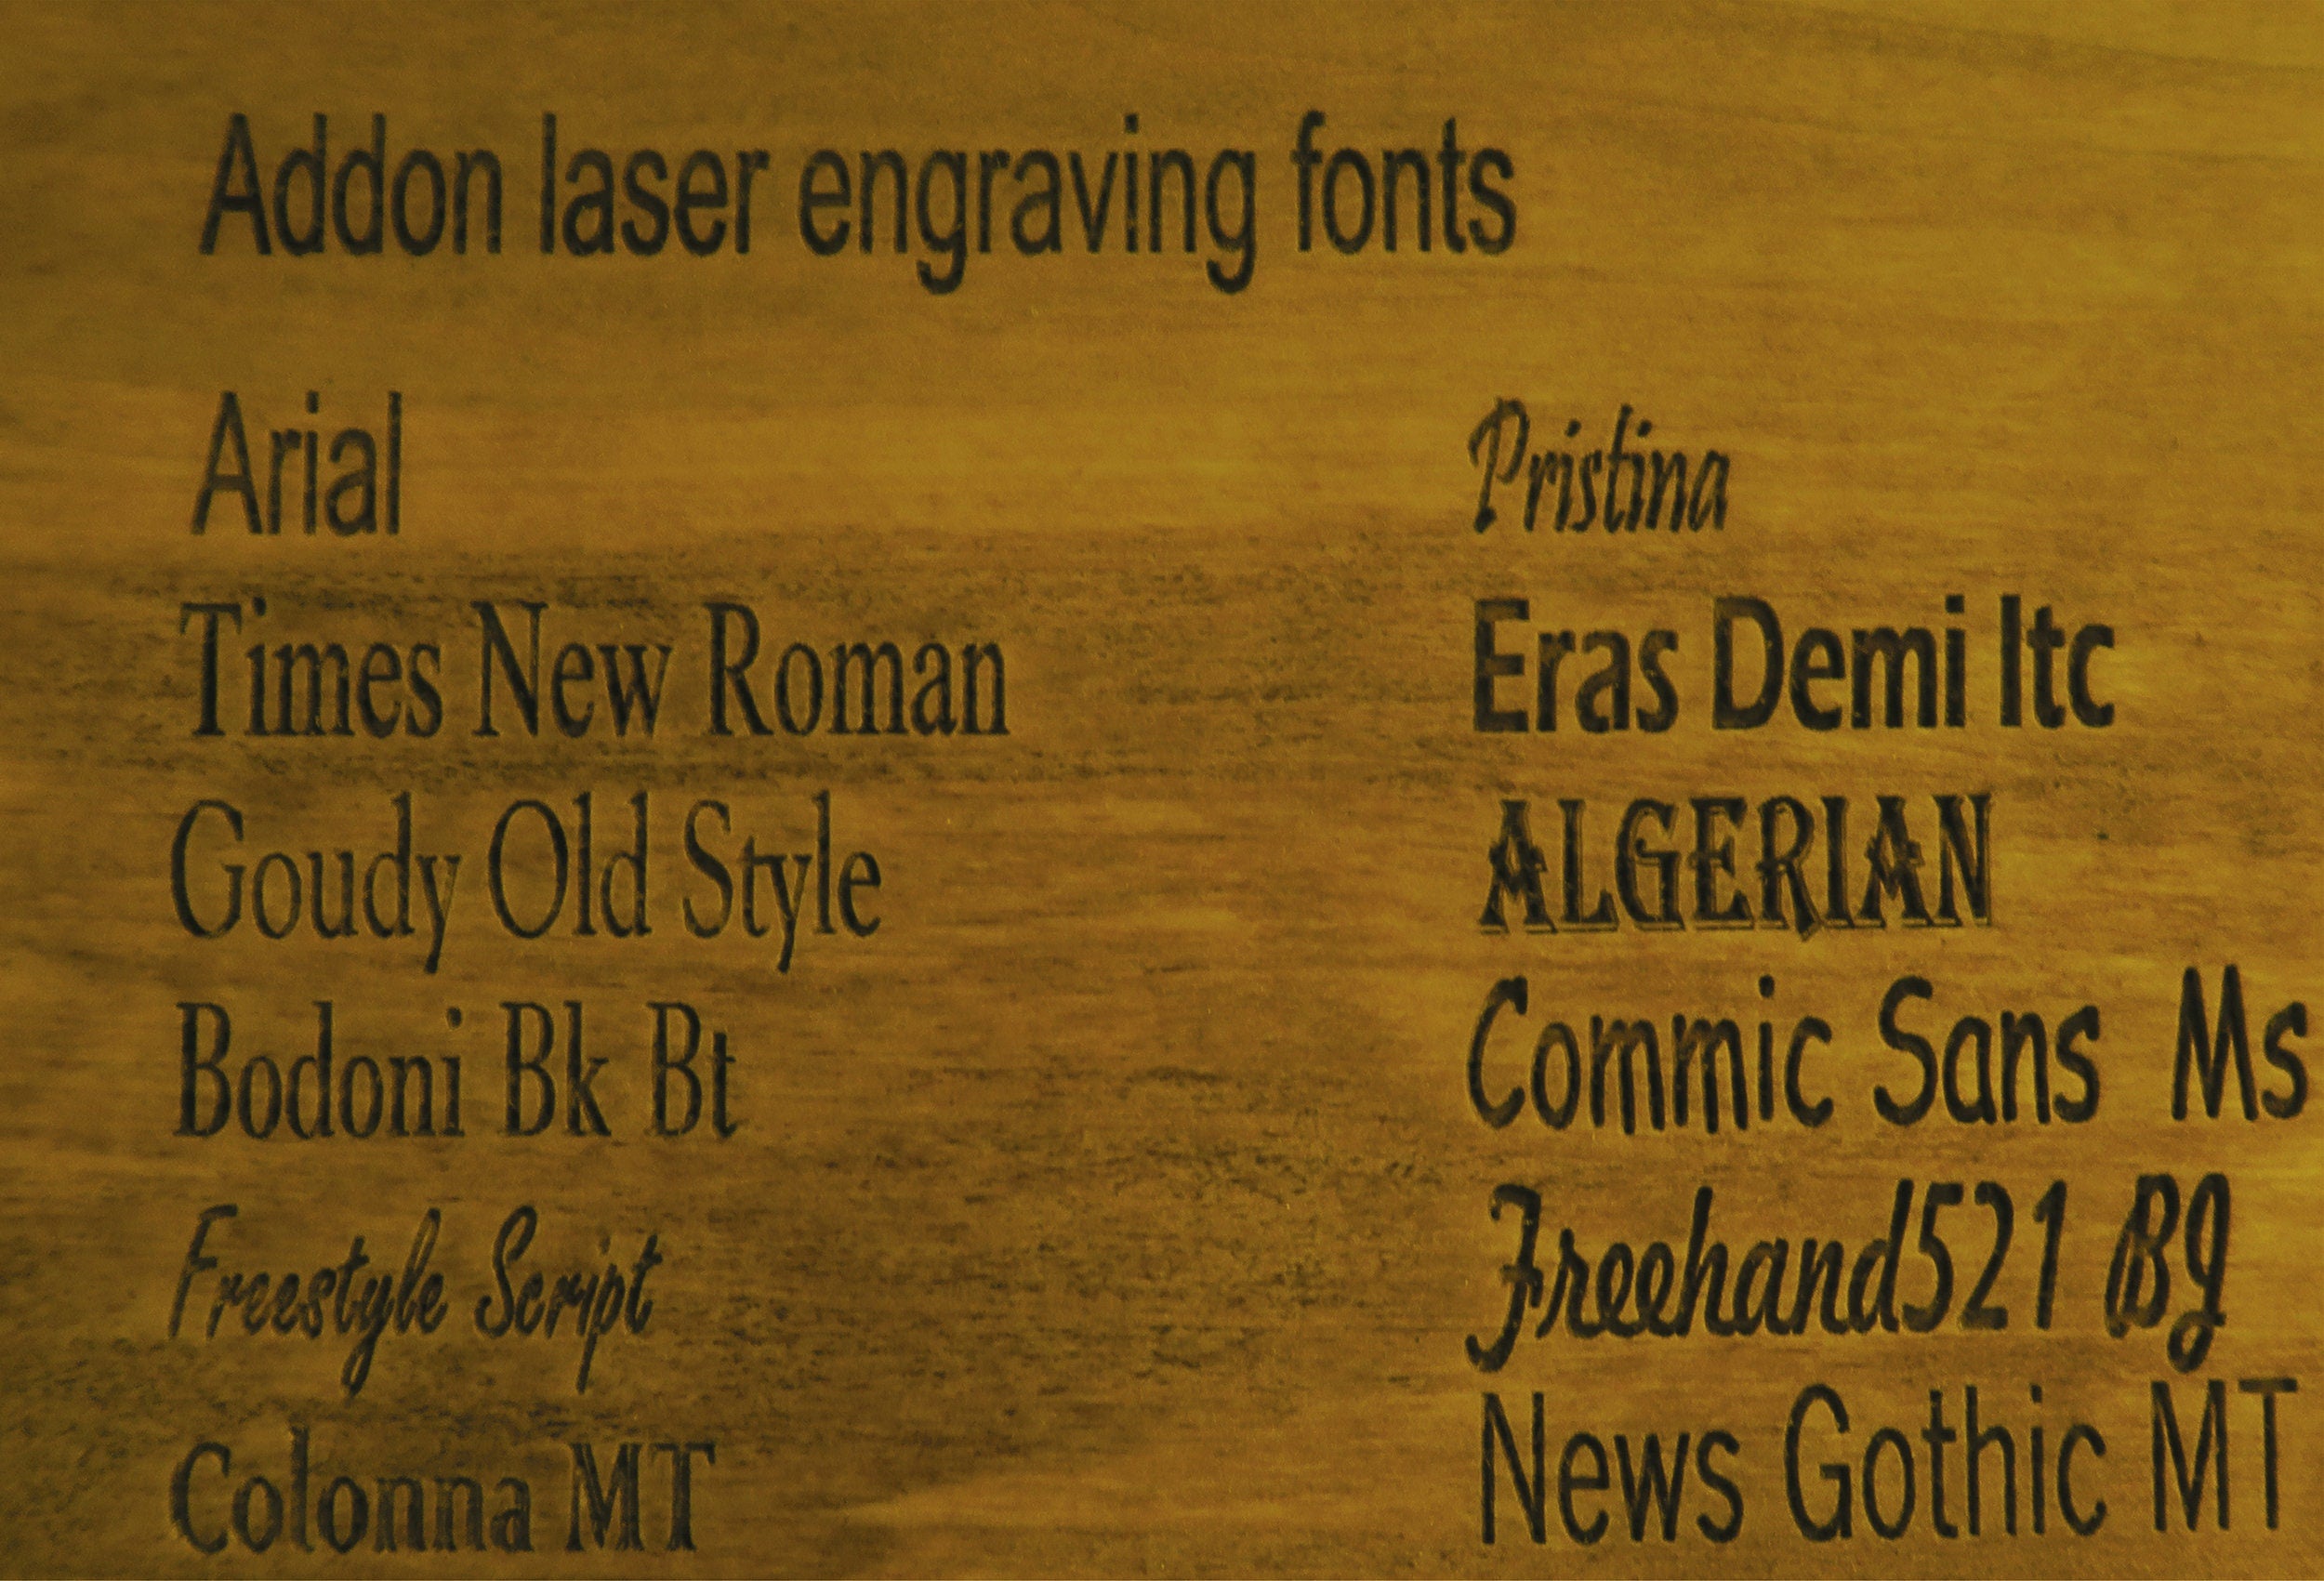 Engraving options, personalized item